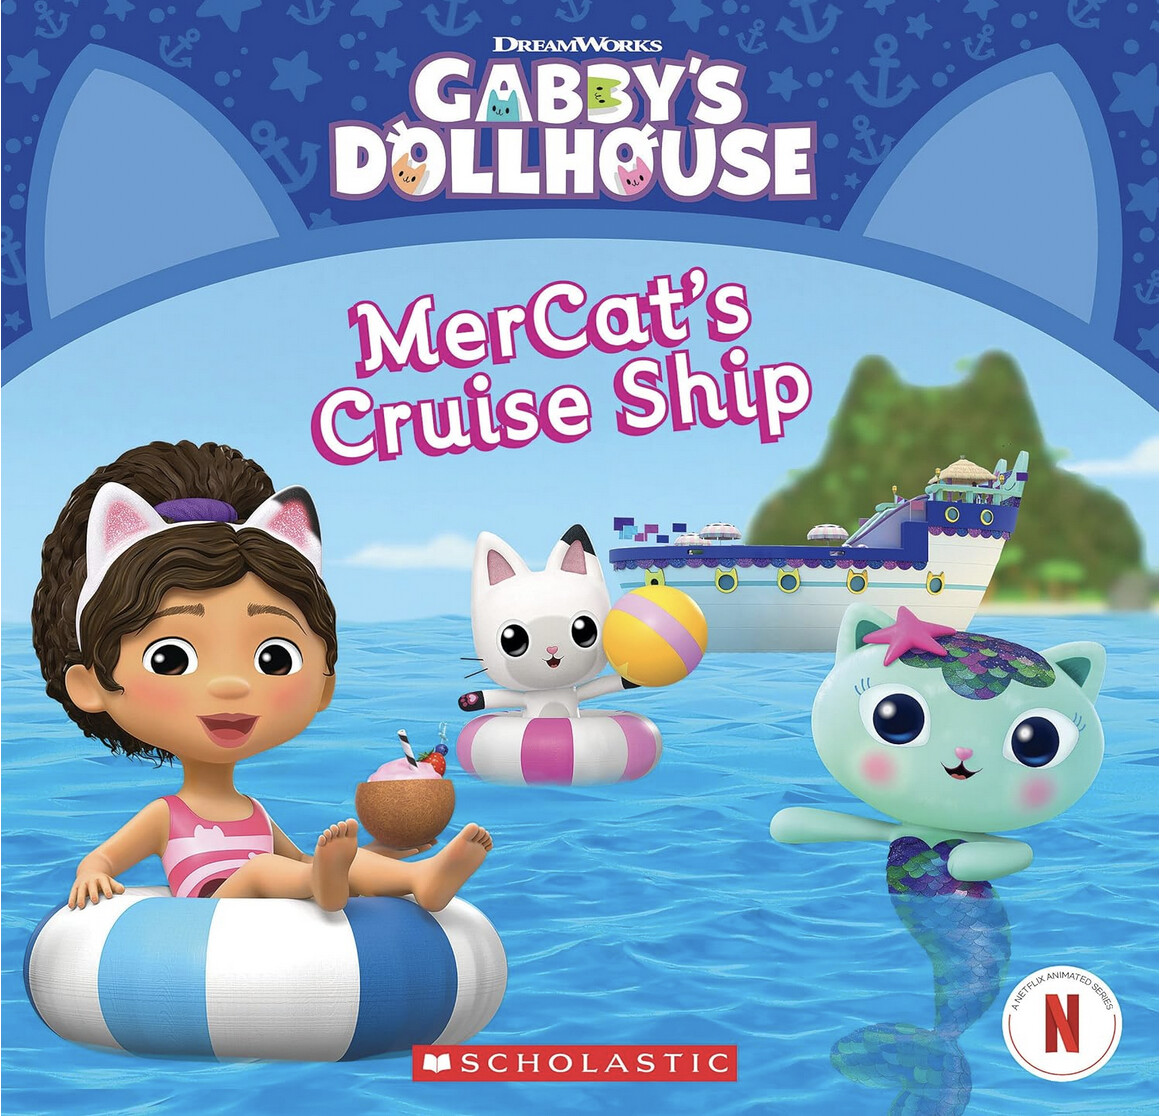 Gabby's Dollhouse #9: MerCat's Cruise Ship Front Cover (Published by Scholastic Inc.)